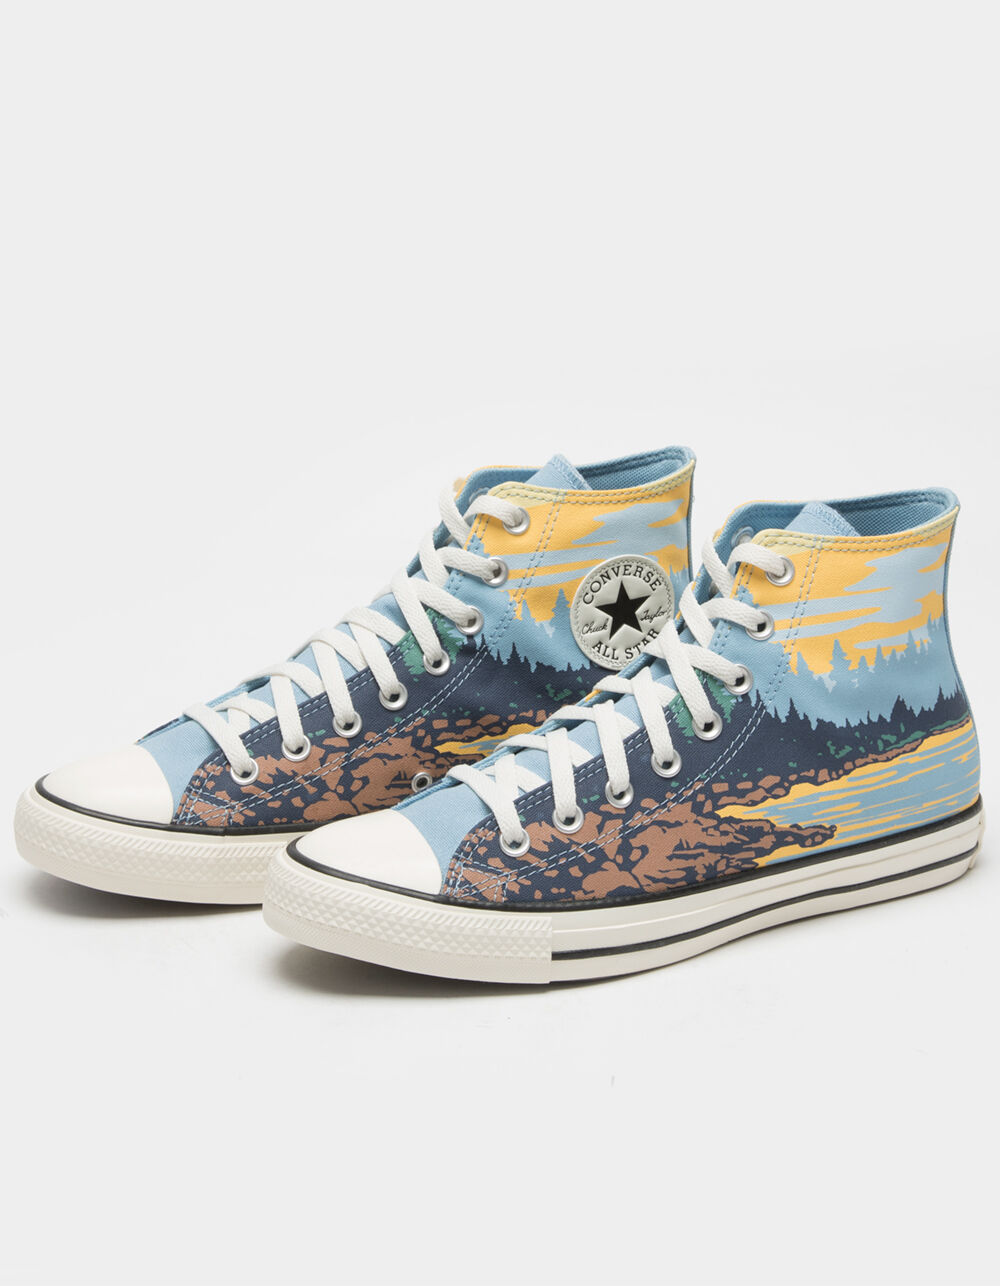 CONVERSE Chuck Taylor All Star National Parks High Top Shoes - MULTI |  Tillys